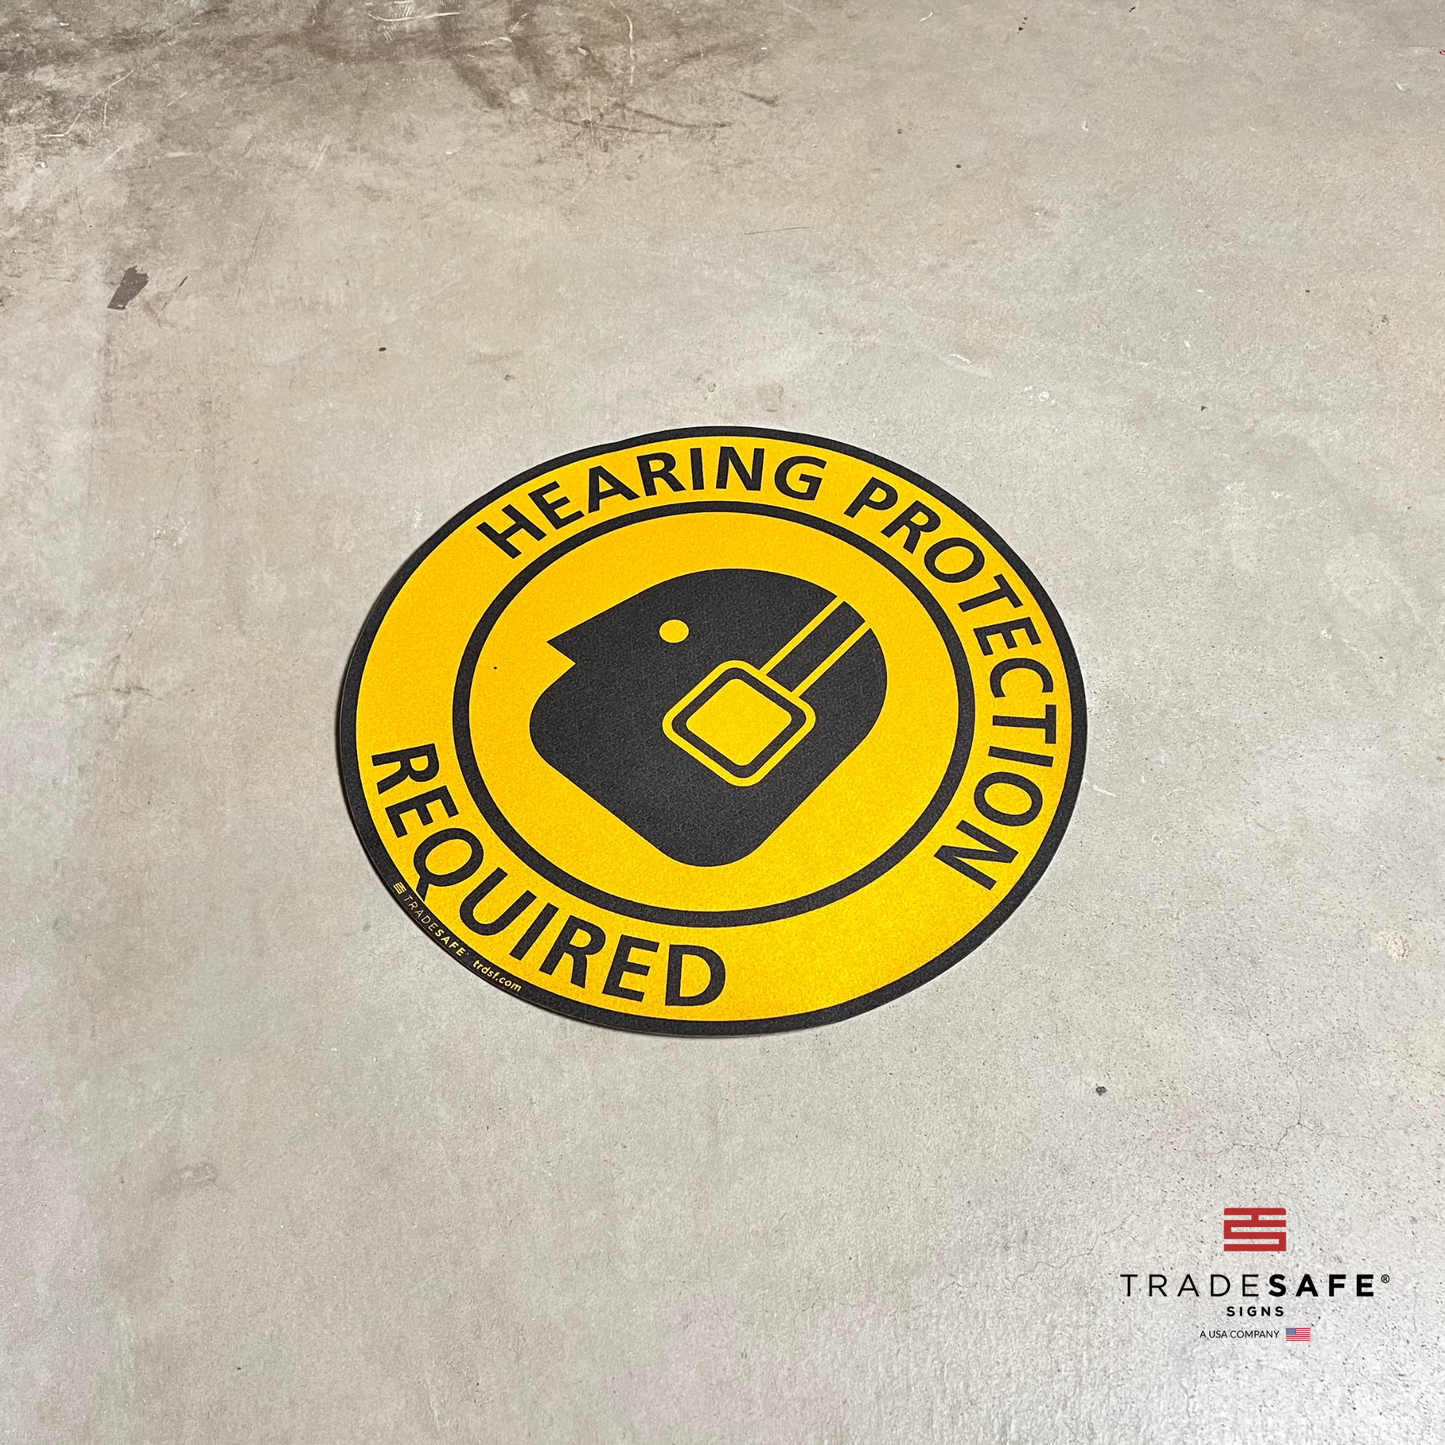 hearing protection required sign vinyl sticker on floor